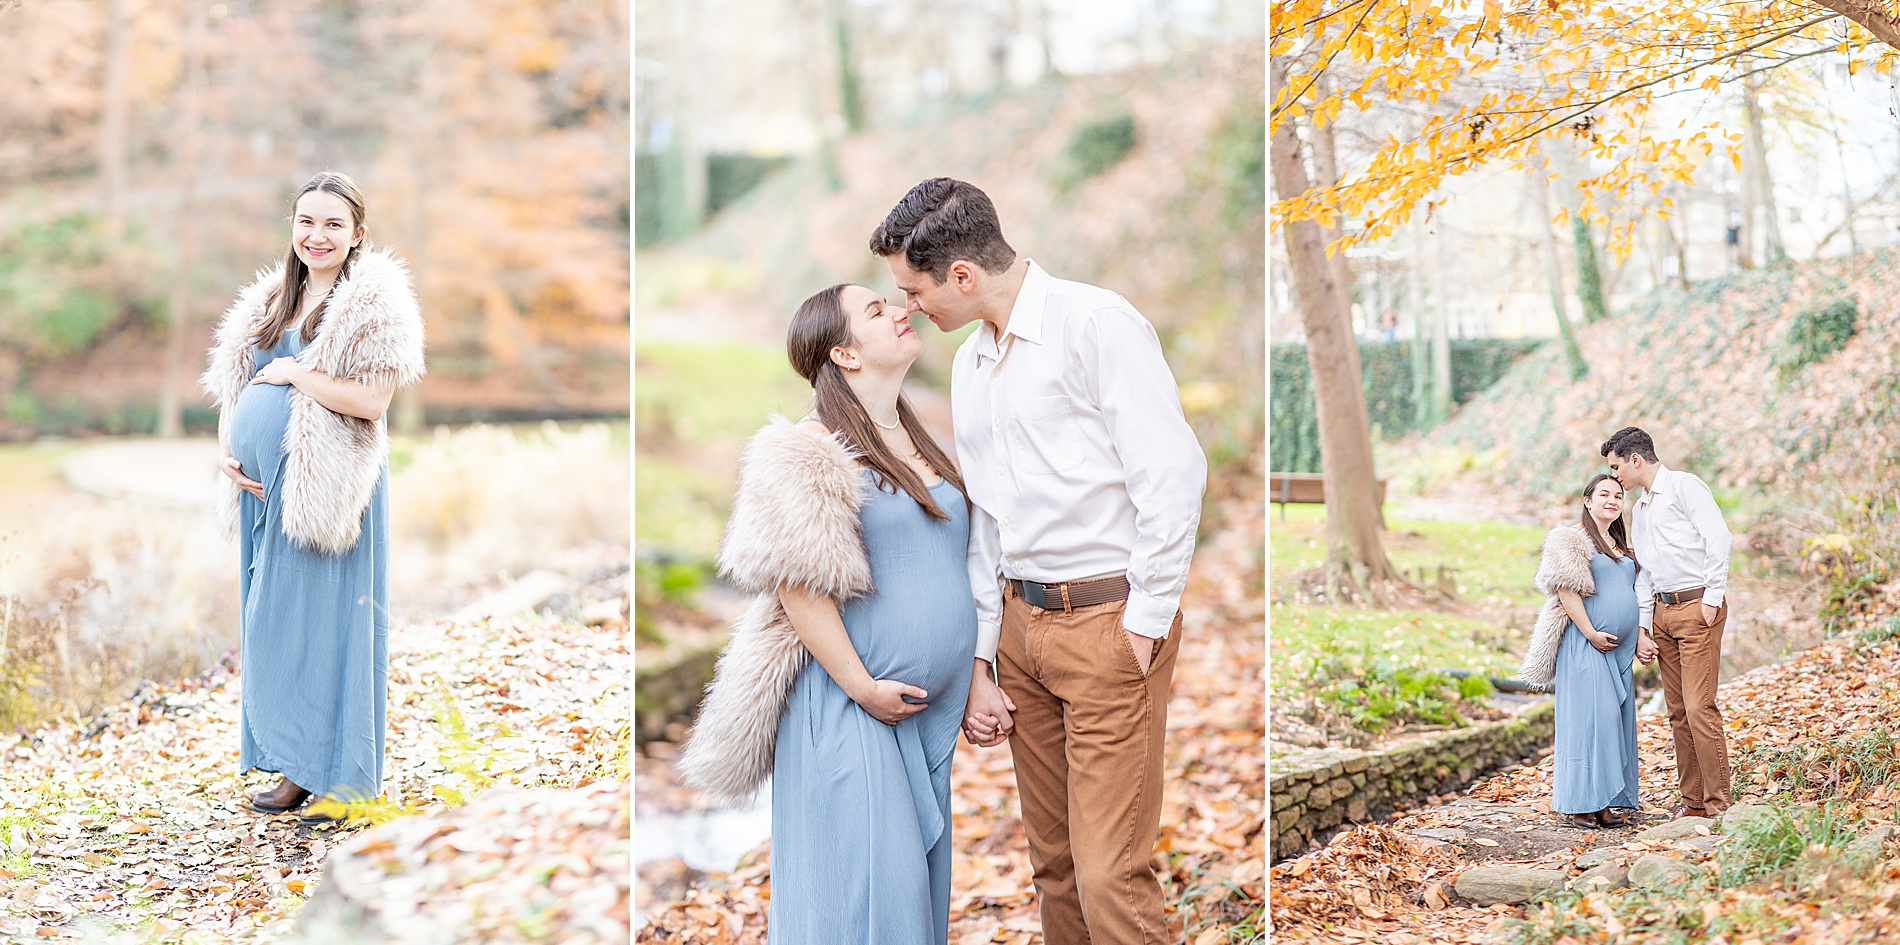 timeless maternity portraits in Greenville South Carolina 